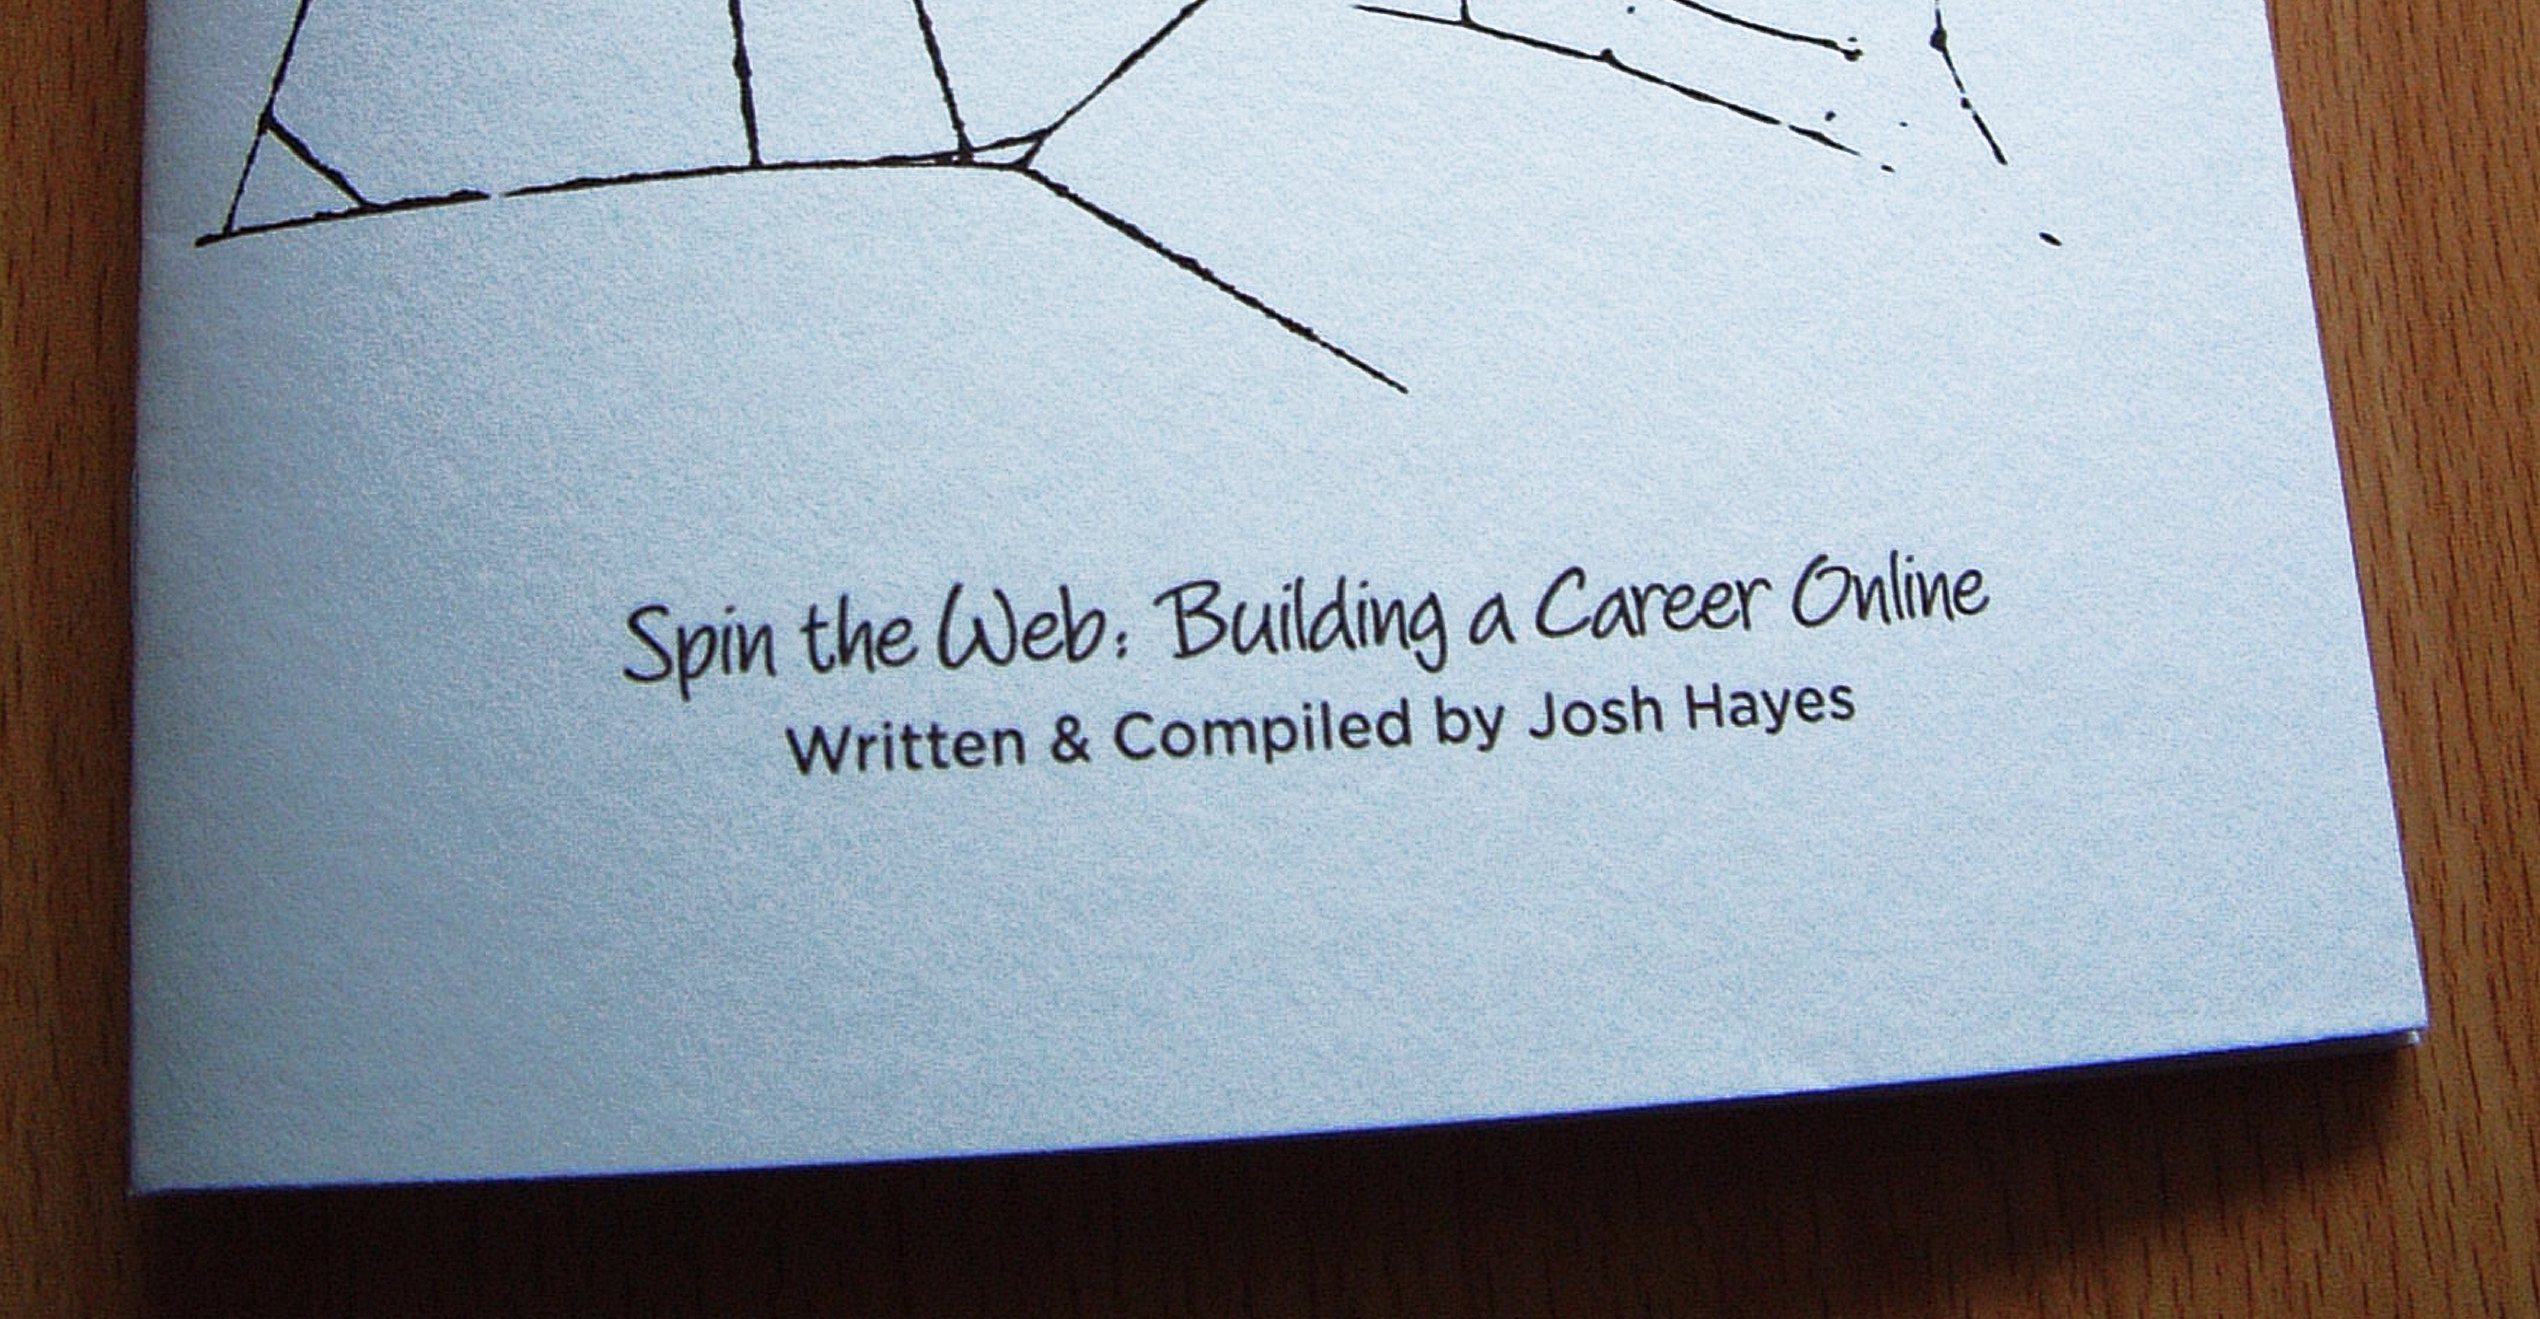 Spin the Web: Building a Career Online Written & Compiled by Josh Hayes